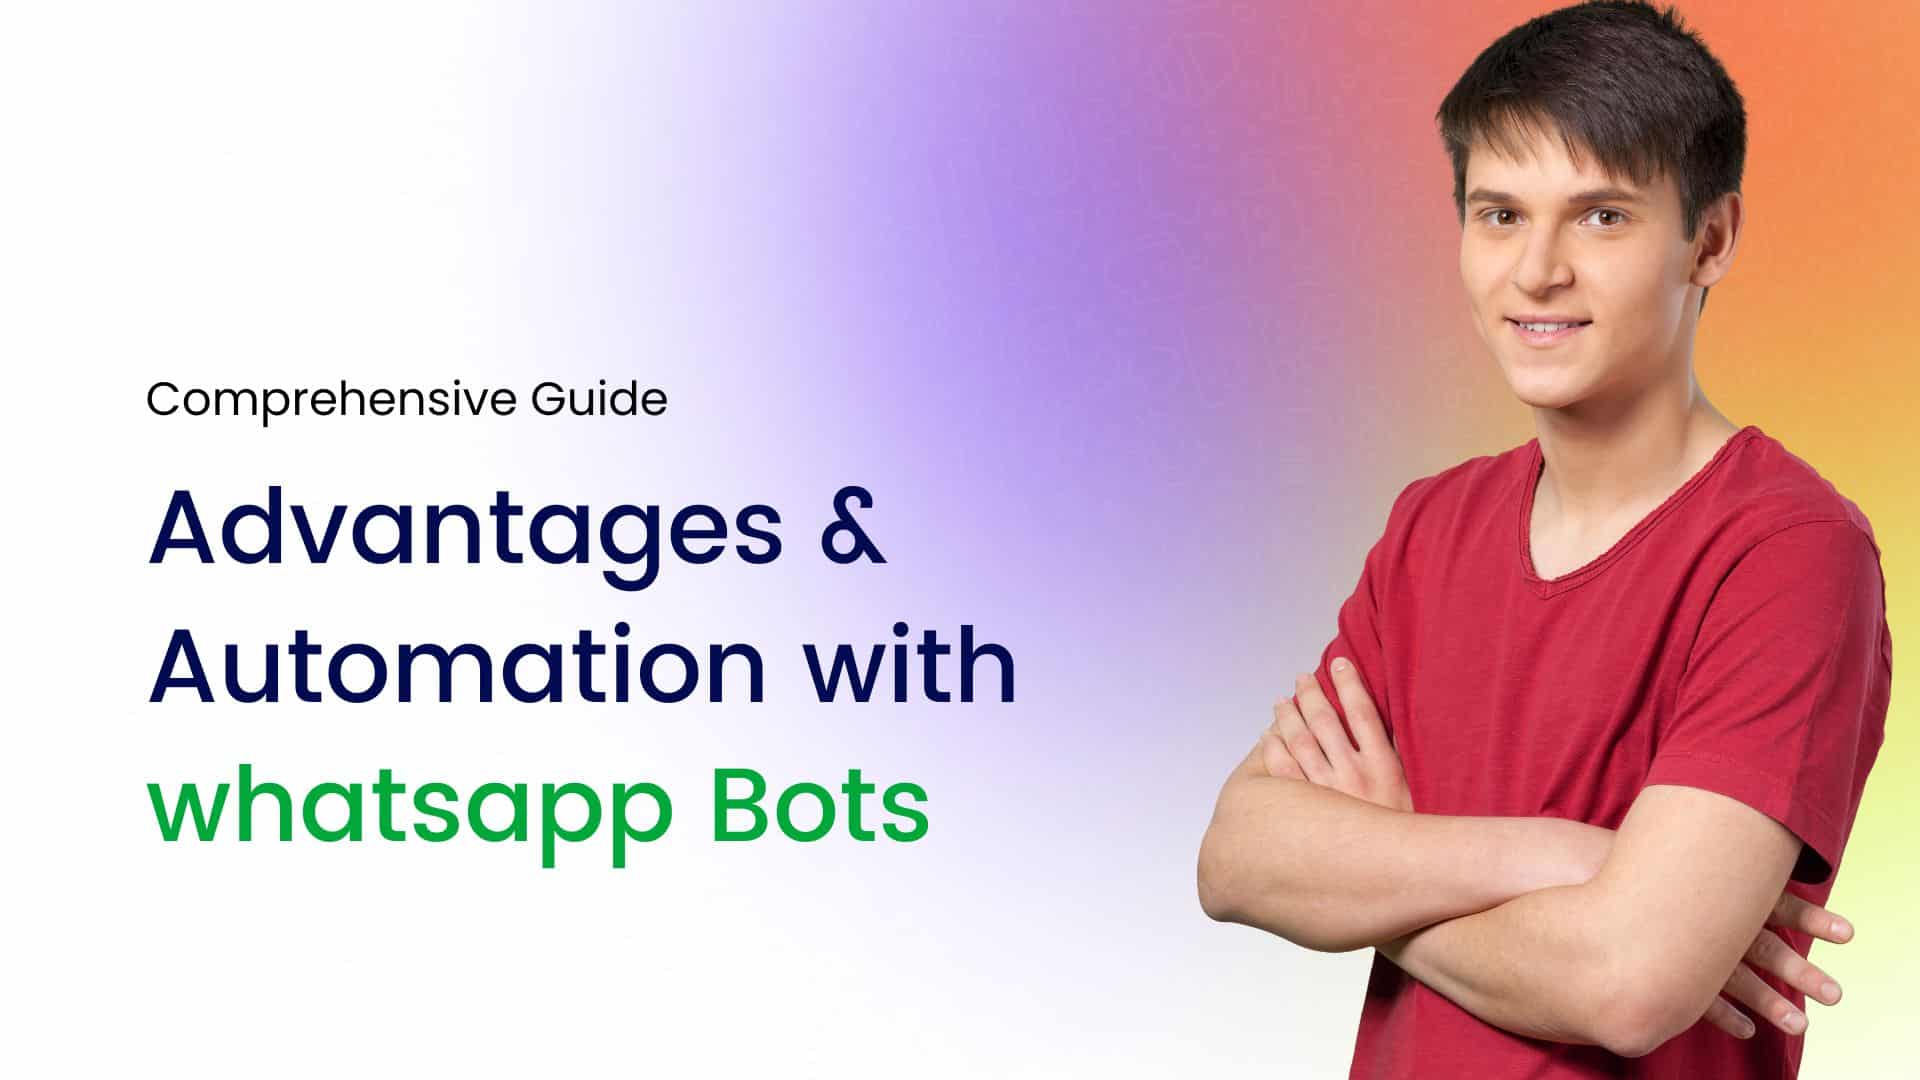 Advantages & Automation with whatsapp Bots